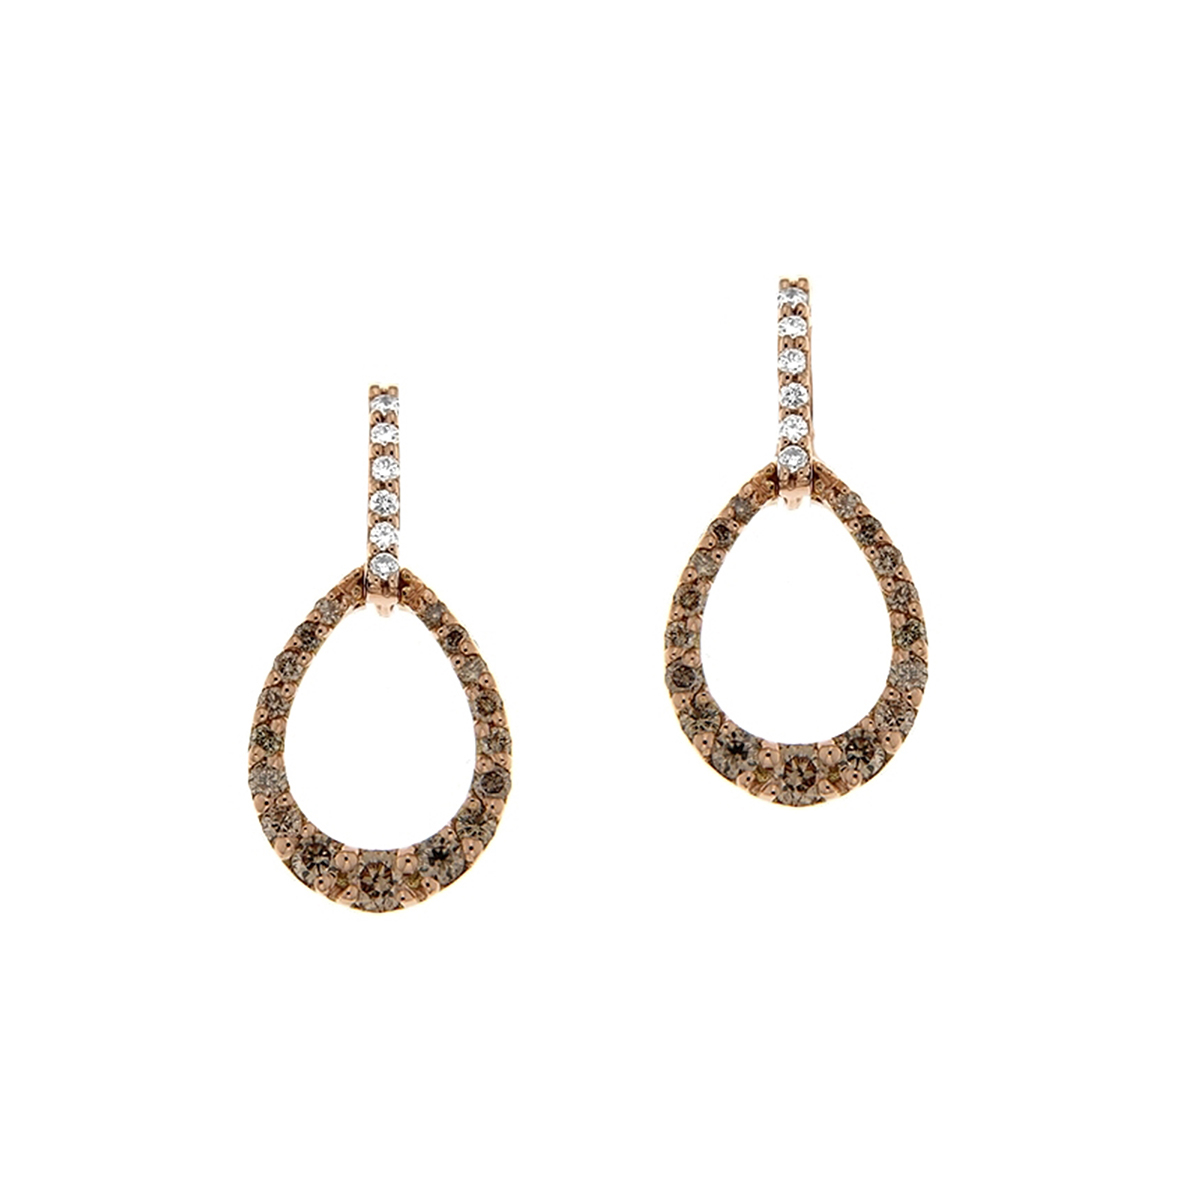 18 K Rose Gold Small Teardrop Earrings with White and Brown Diamonds